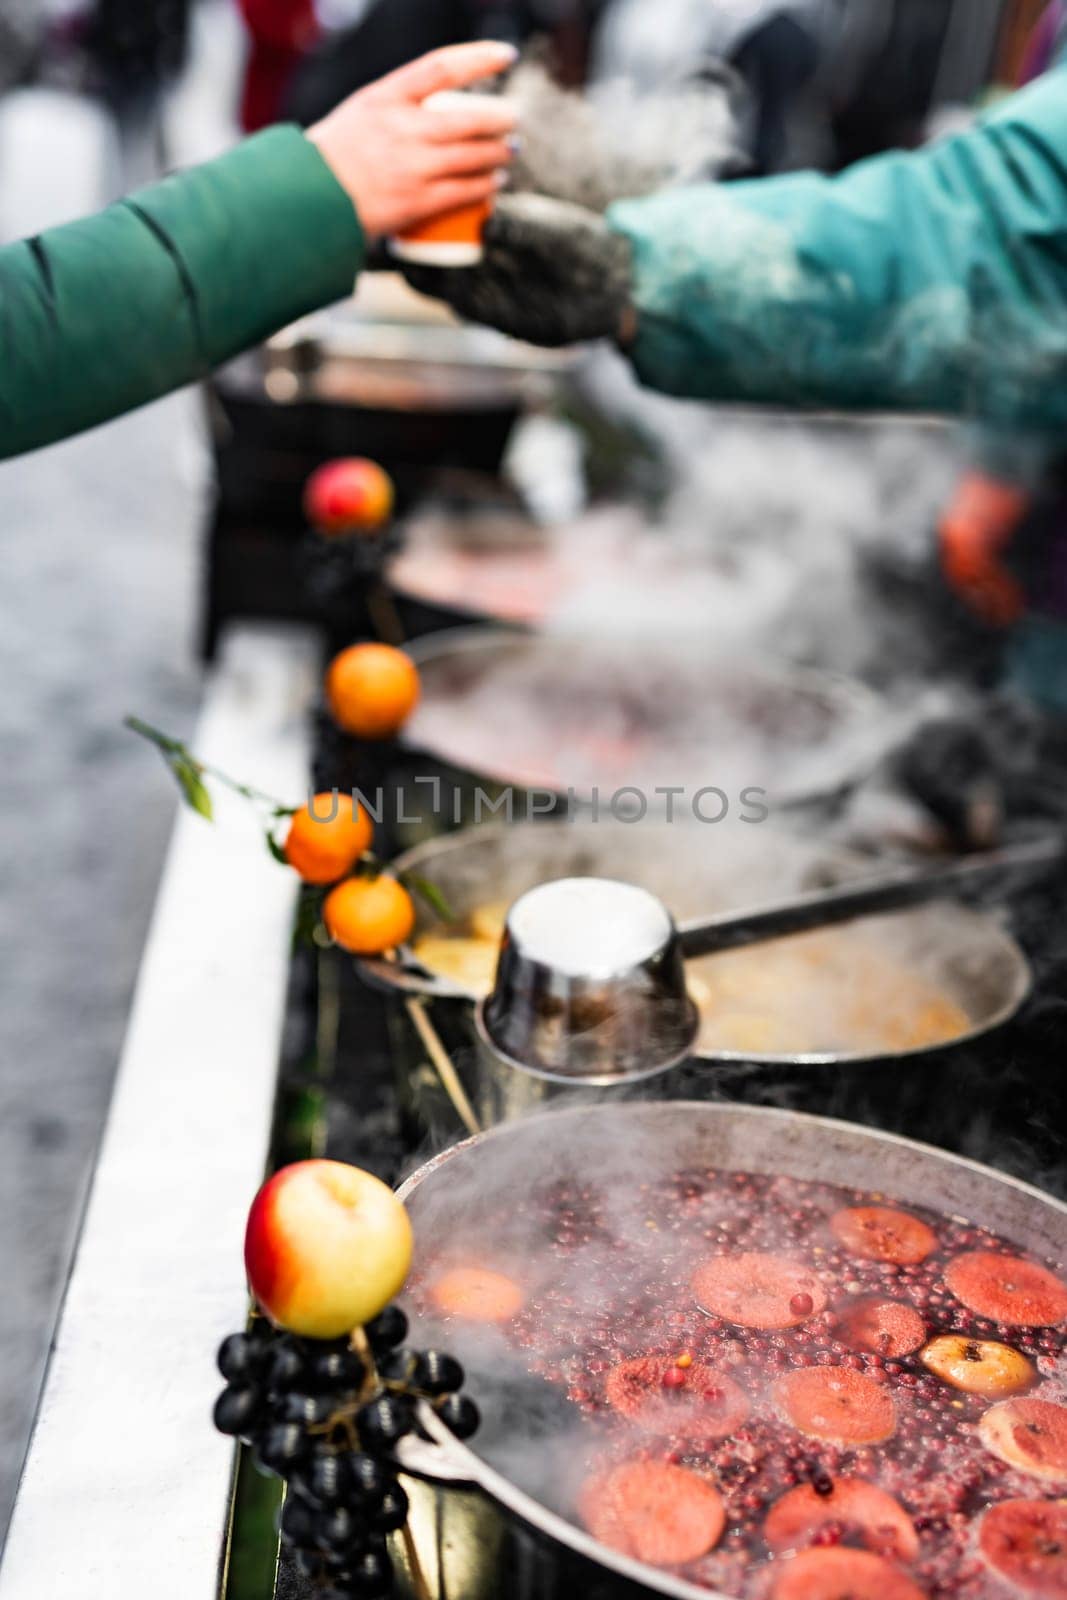 Person buy hot fruit and berries mulled winebeverage at street food market. Fresh drinks in pots at fair outdoors